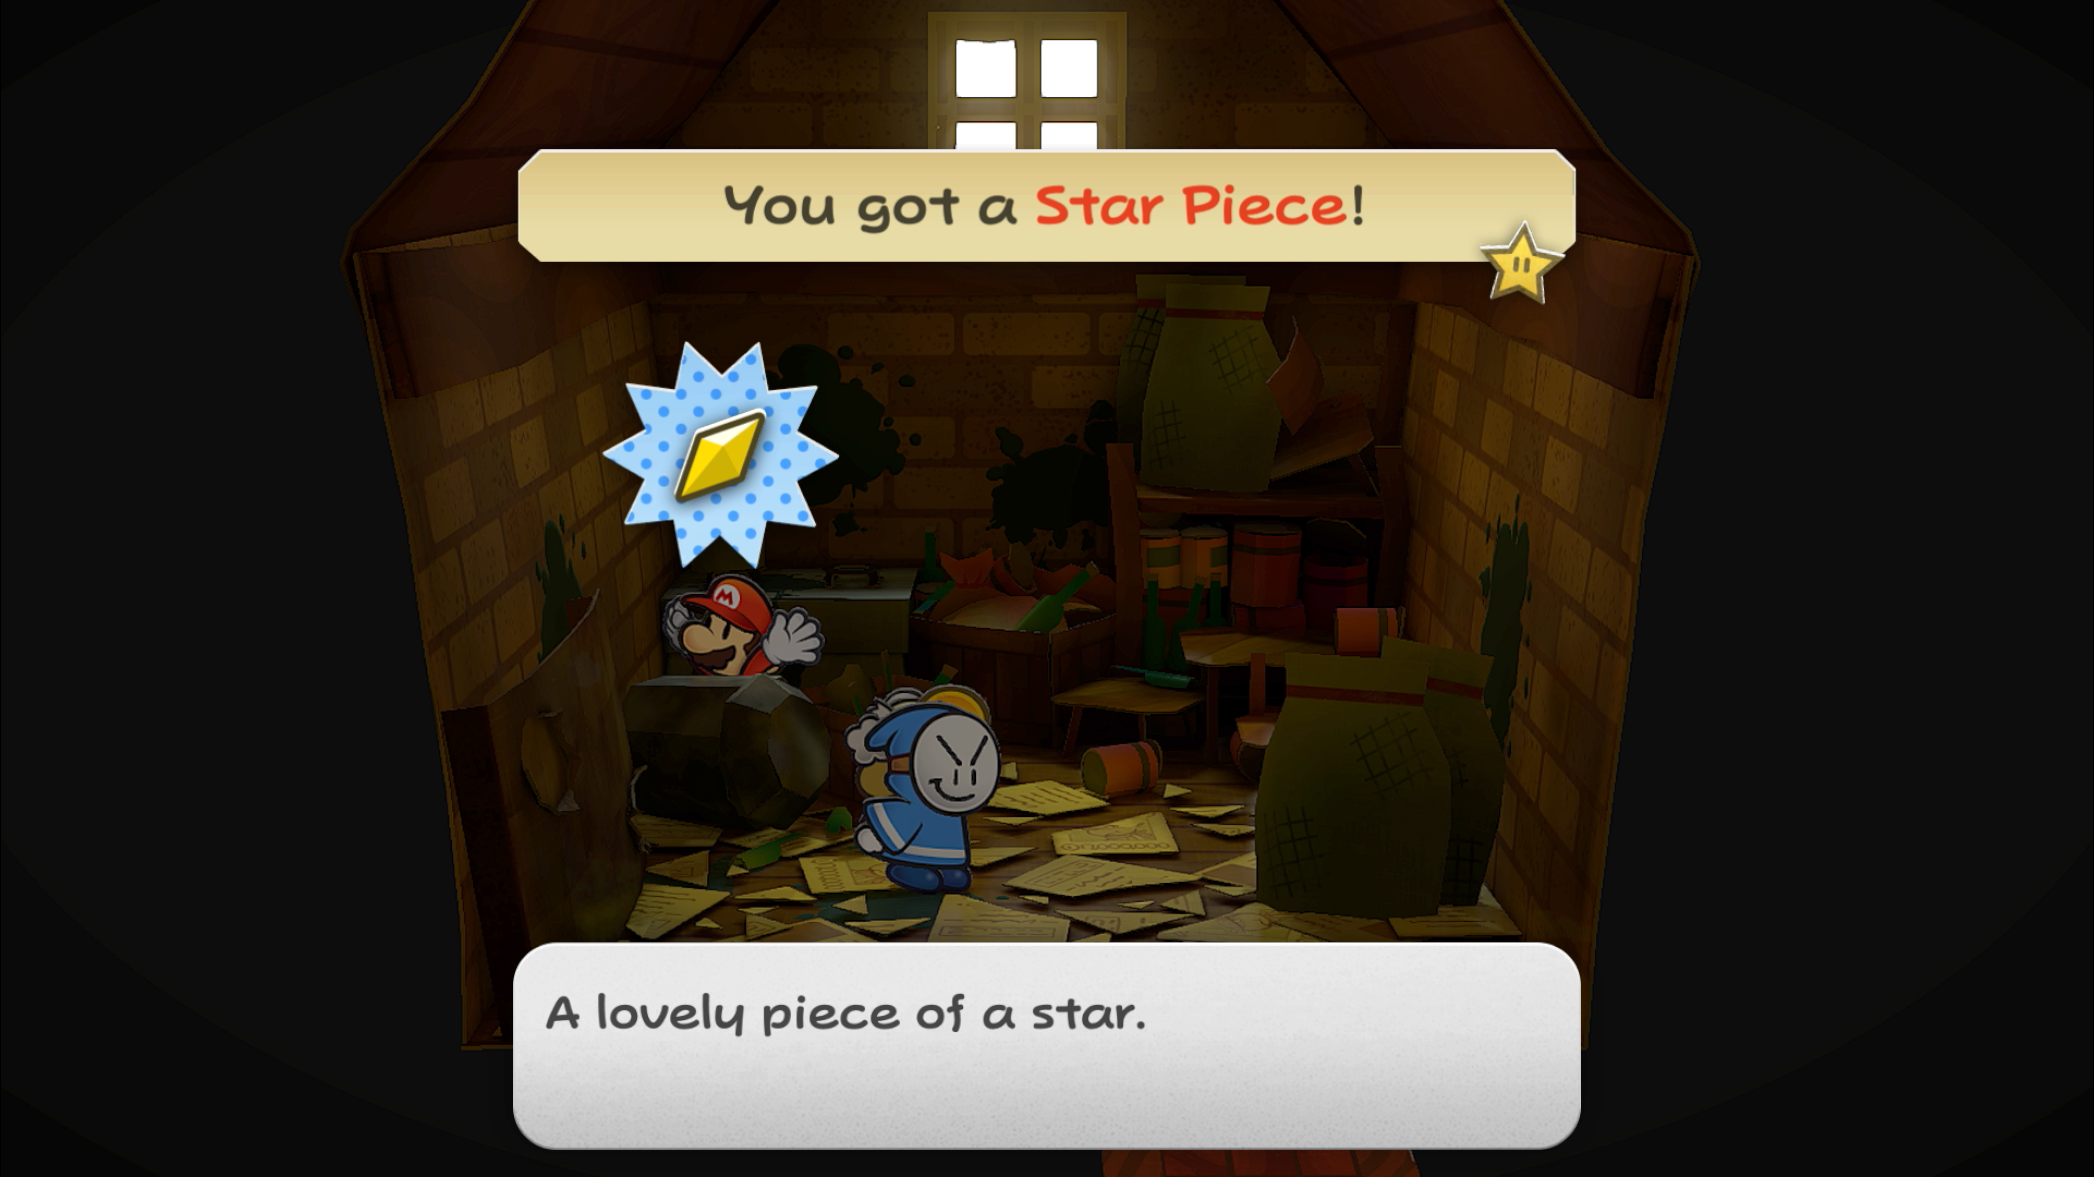 Mario lifts up a Star Piece behind a blue thief in a dark building in Paper Mario: The Thousand-Year Door.